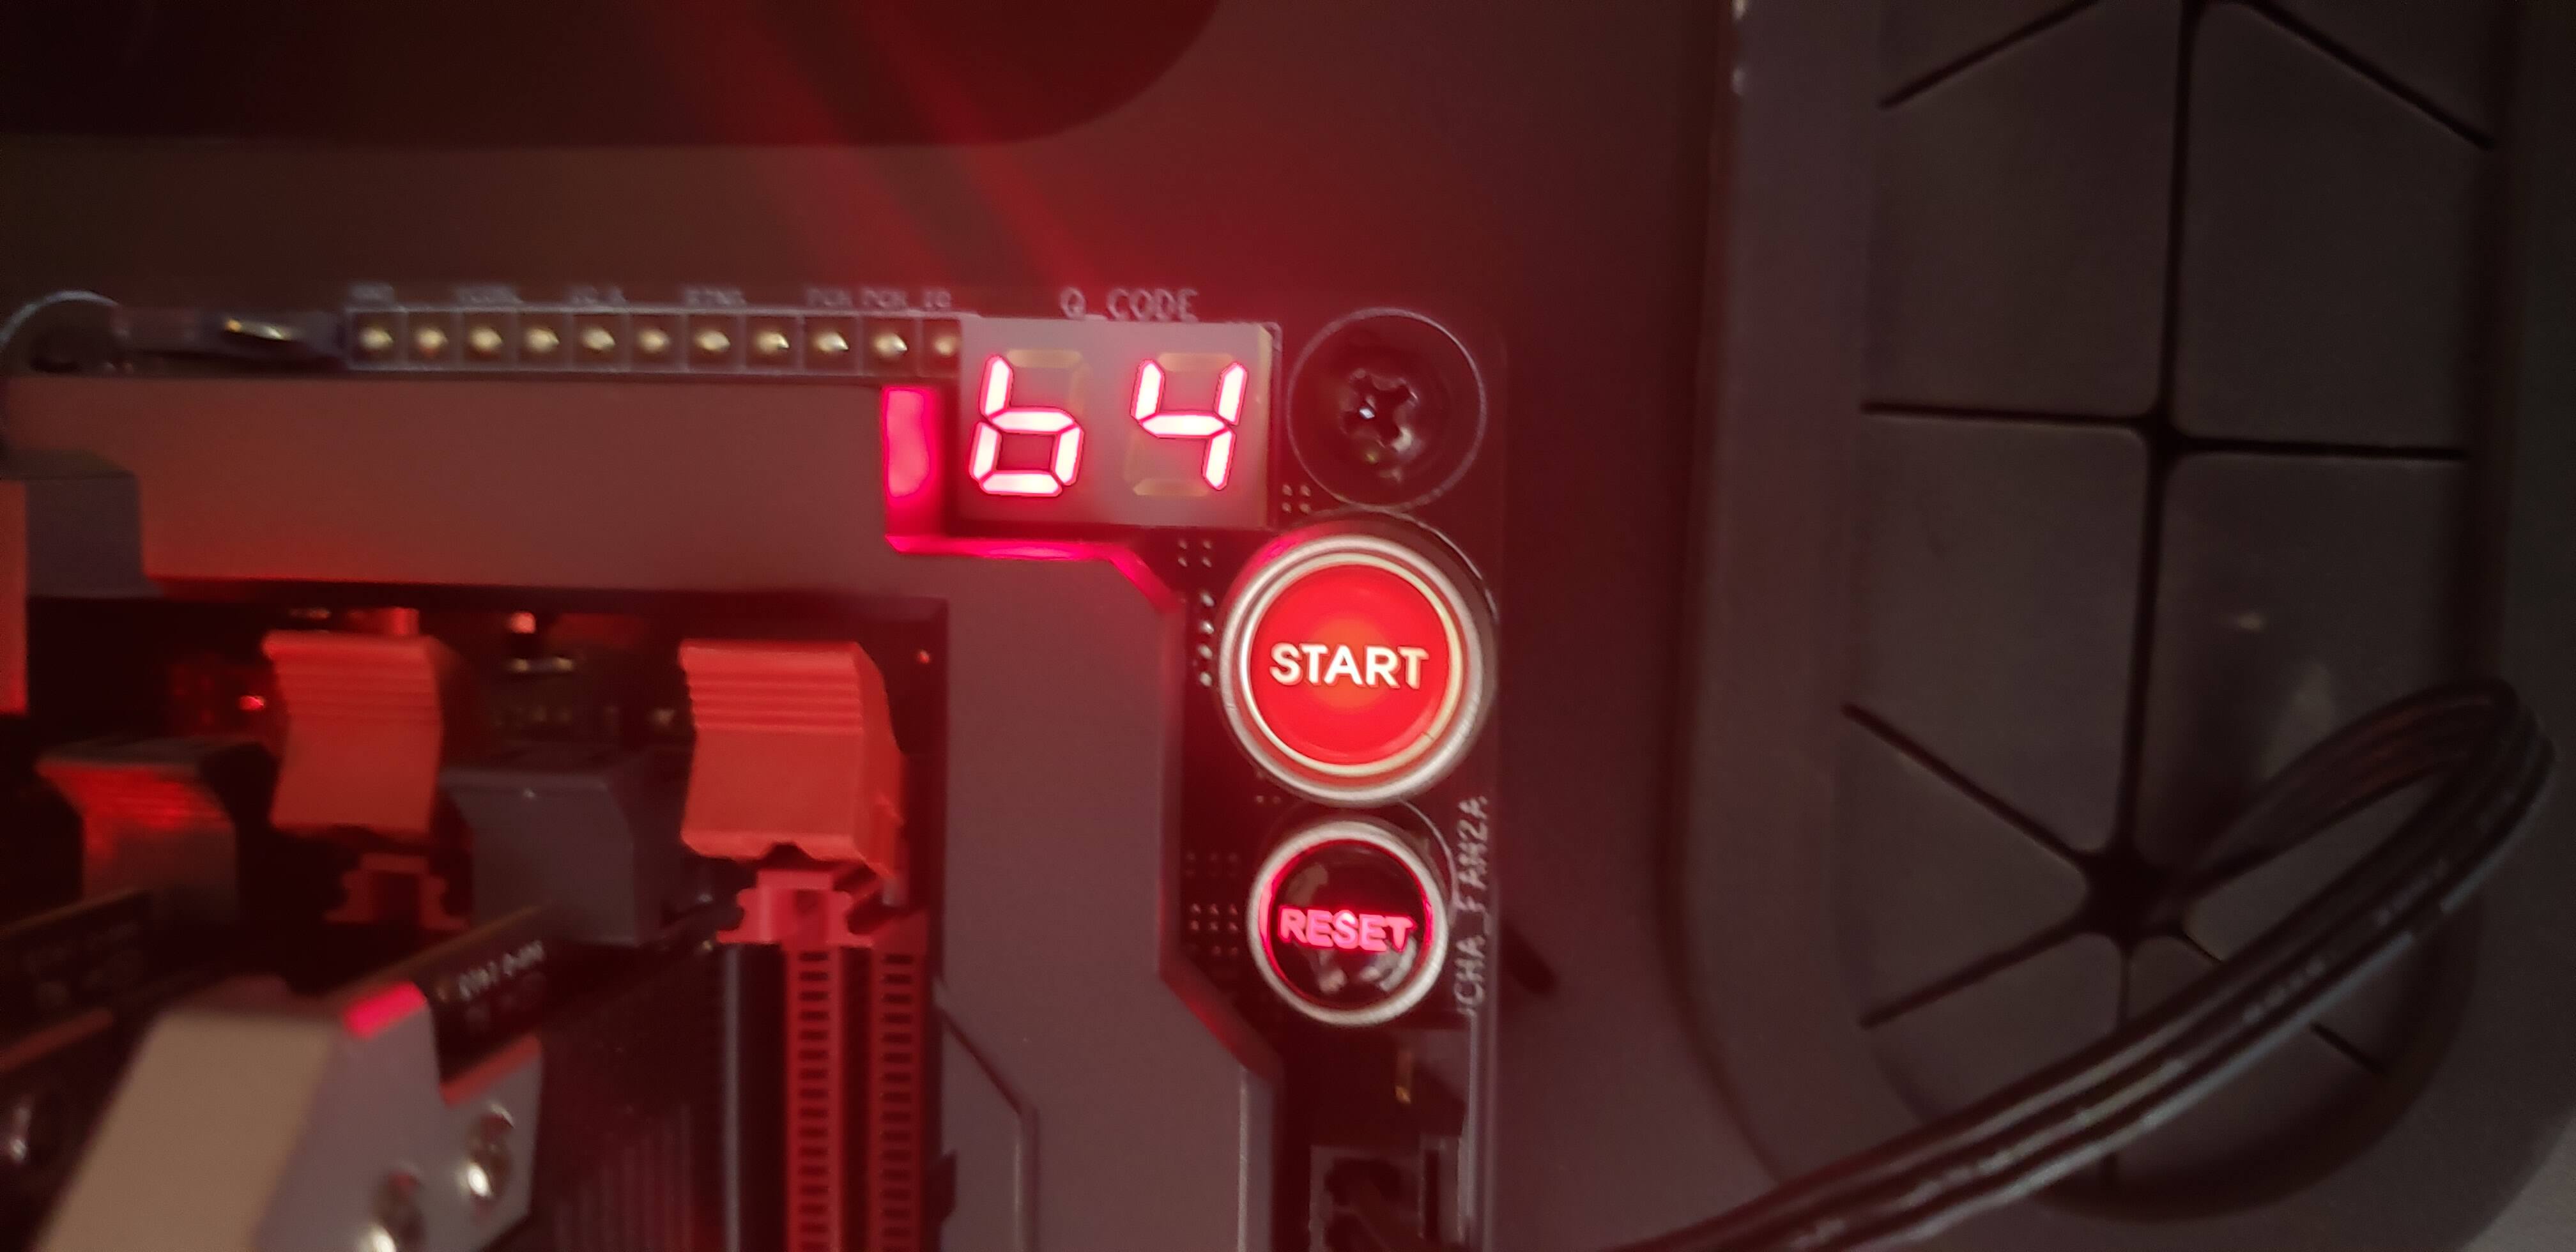 How To Figure Out Why Your PC Is Beeping (Beep Codes)